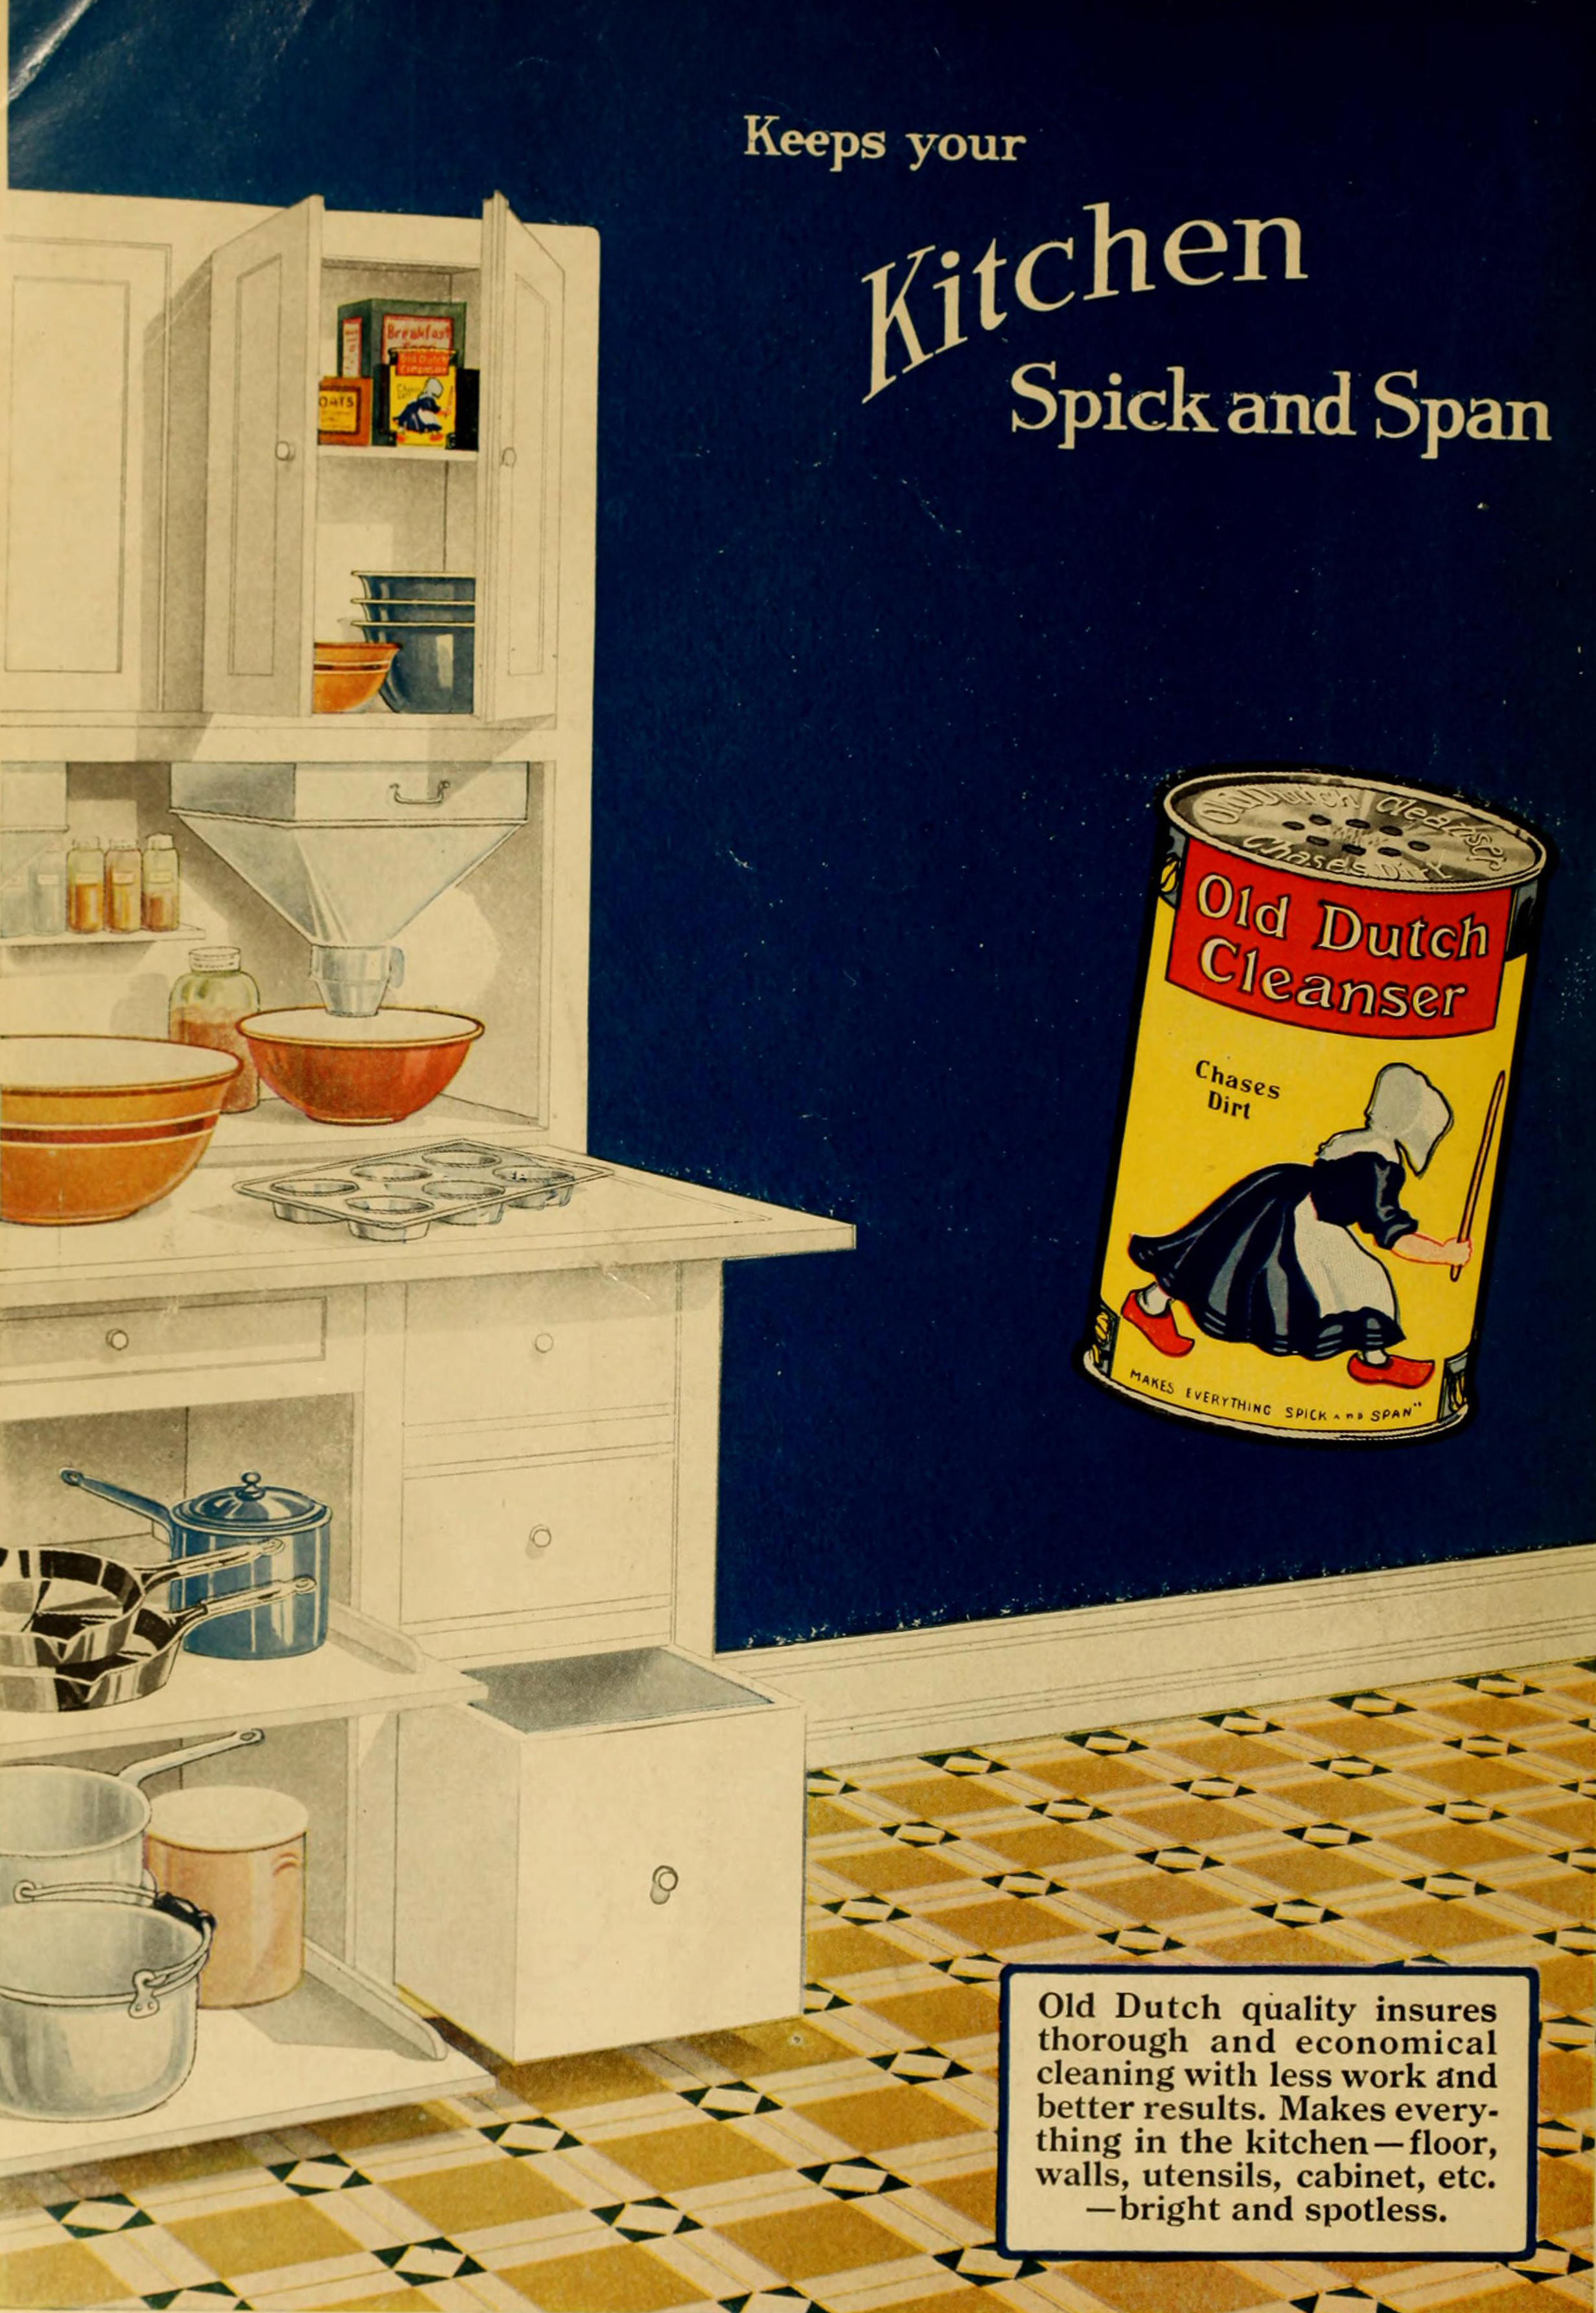 Old Dutch Cleanser Ad circa 1919 - Keeps Your Kitchen Spick and Span